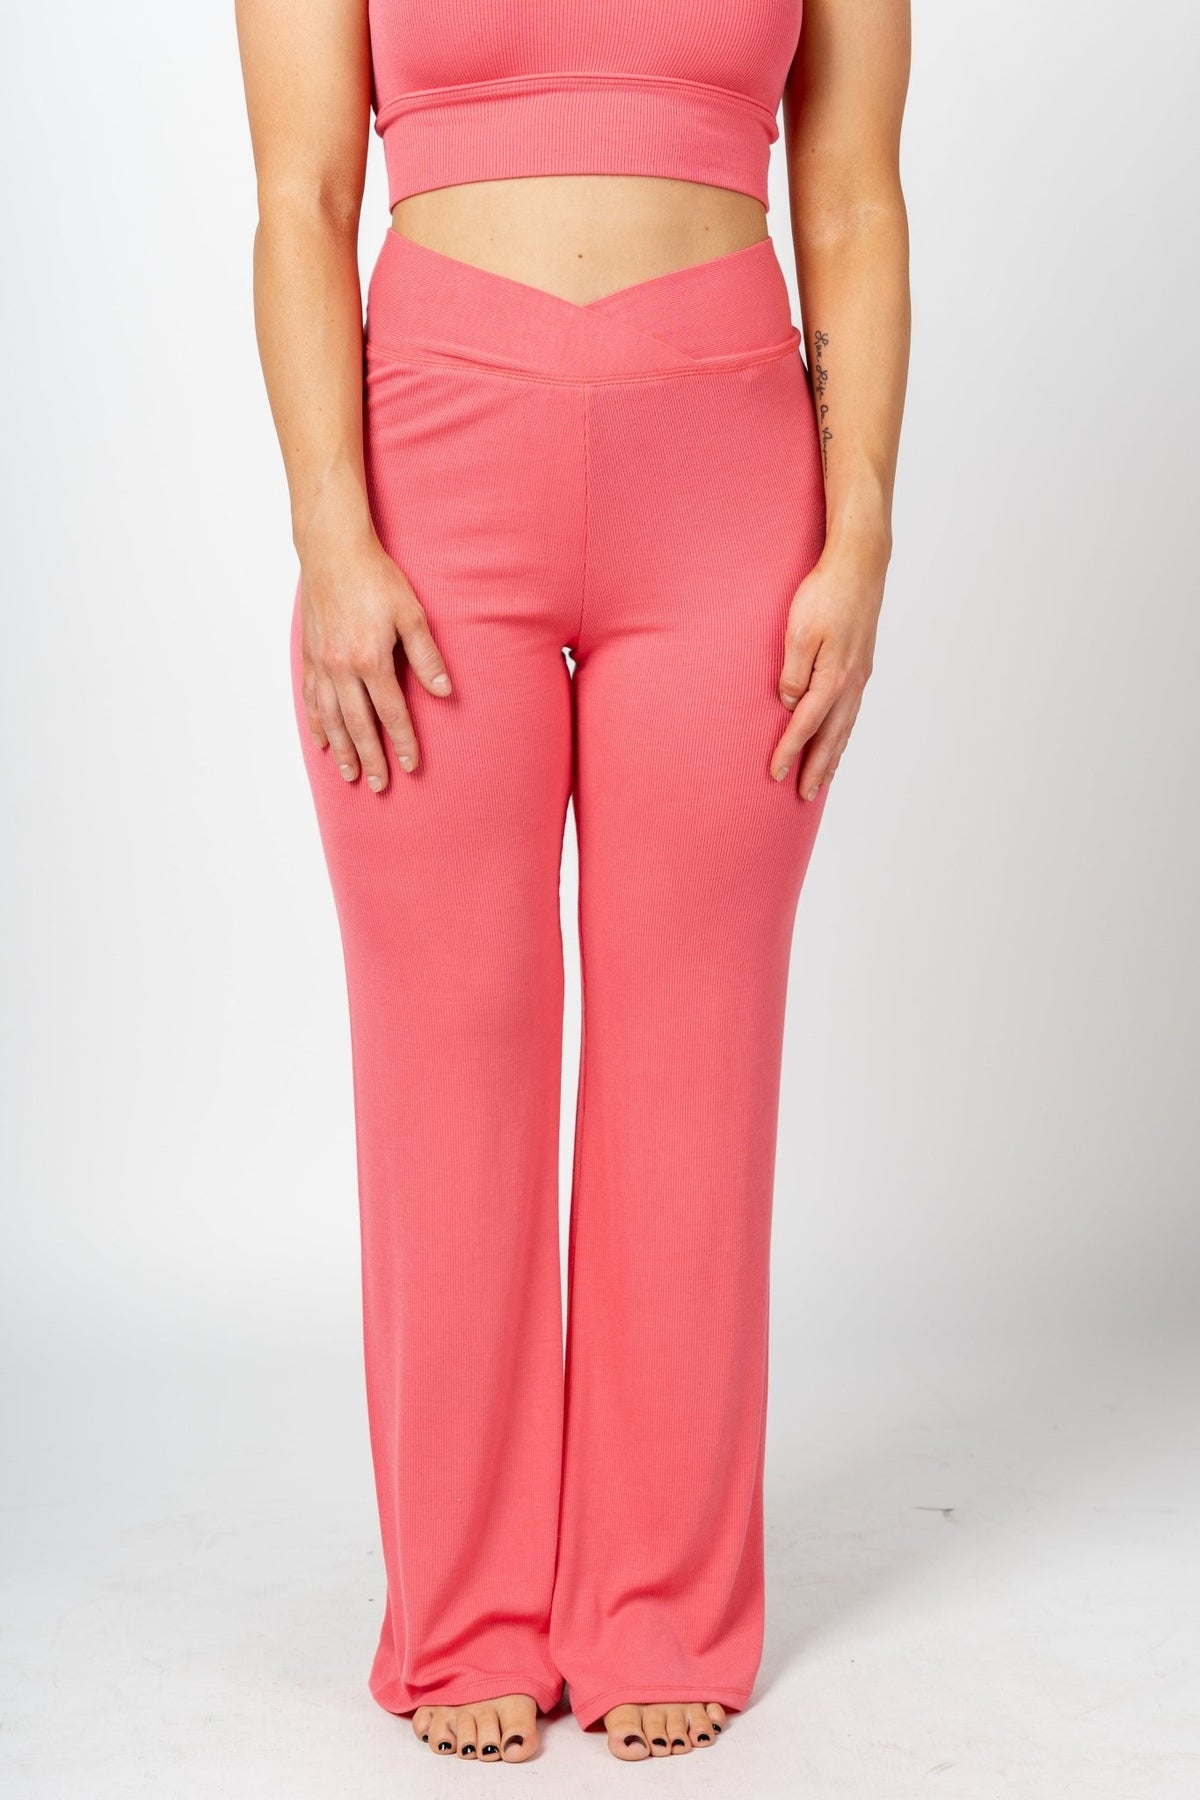 Z Supply crossover rib pant watermelon - Z Supply pants - Z Supply Tops, Dresses, Tanks, Tees, Cardigans, Joggers and Loungewear at Lush Fashion Lounge